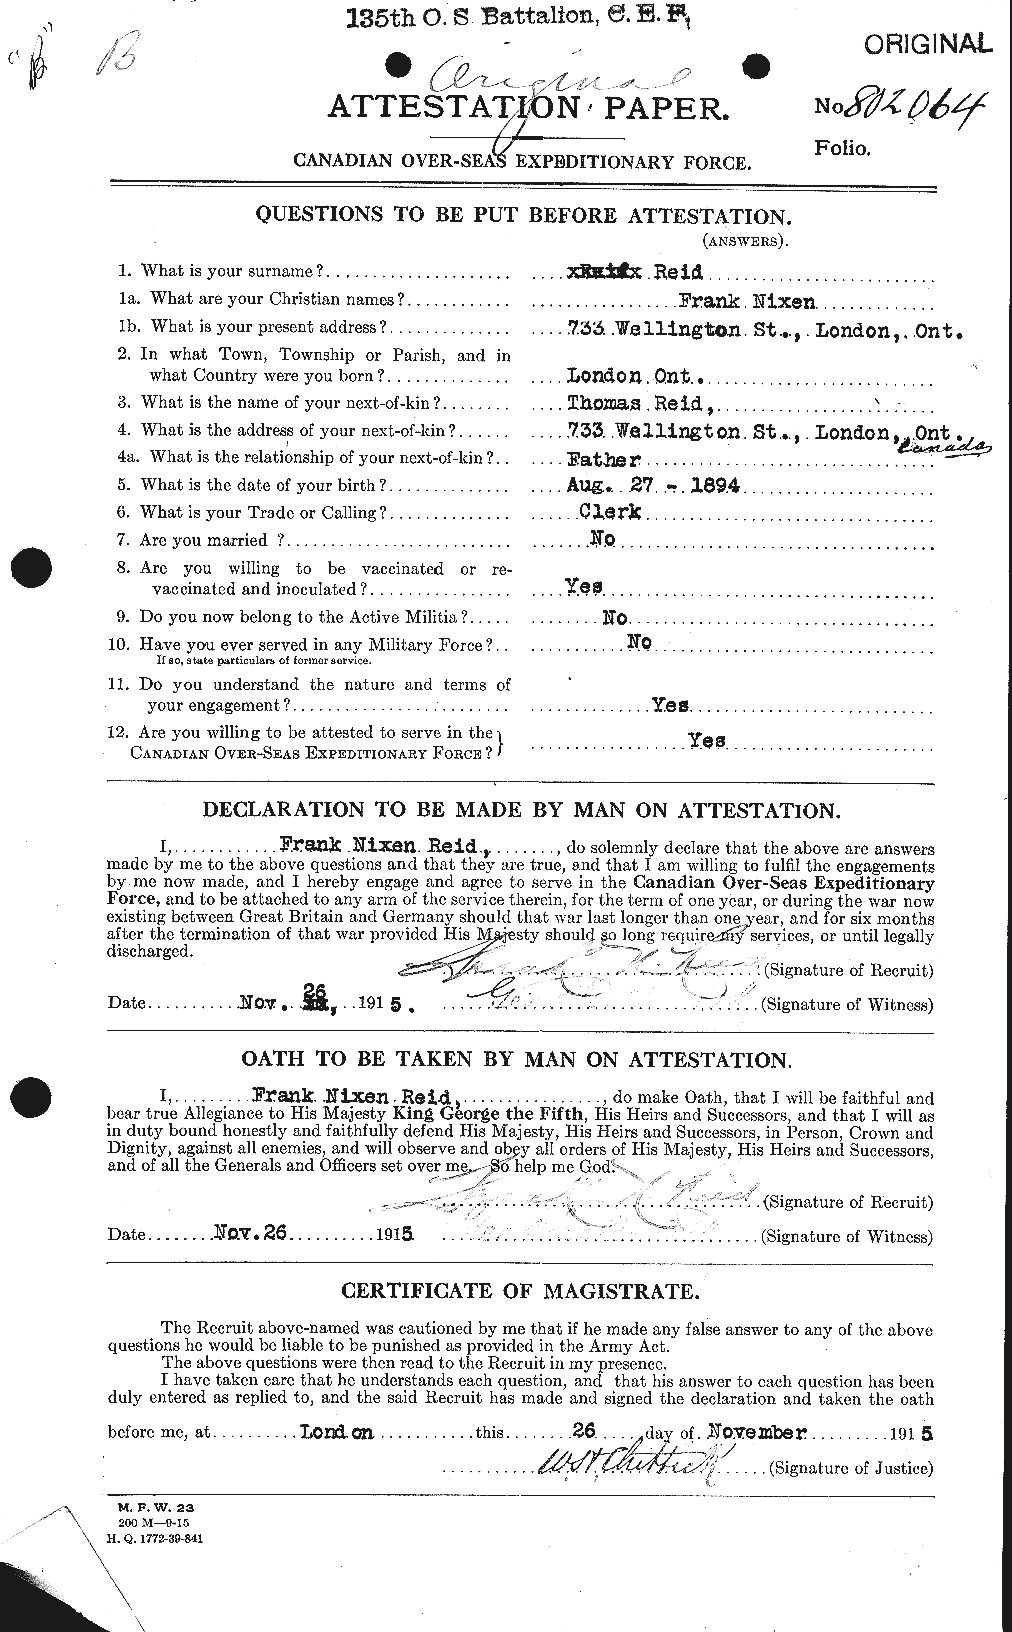 Personnel Records of the First World War - CEF 598050a